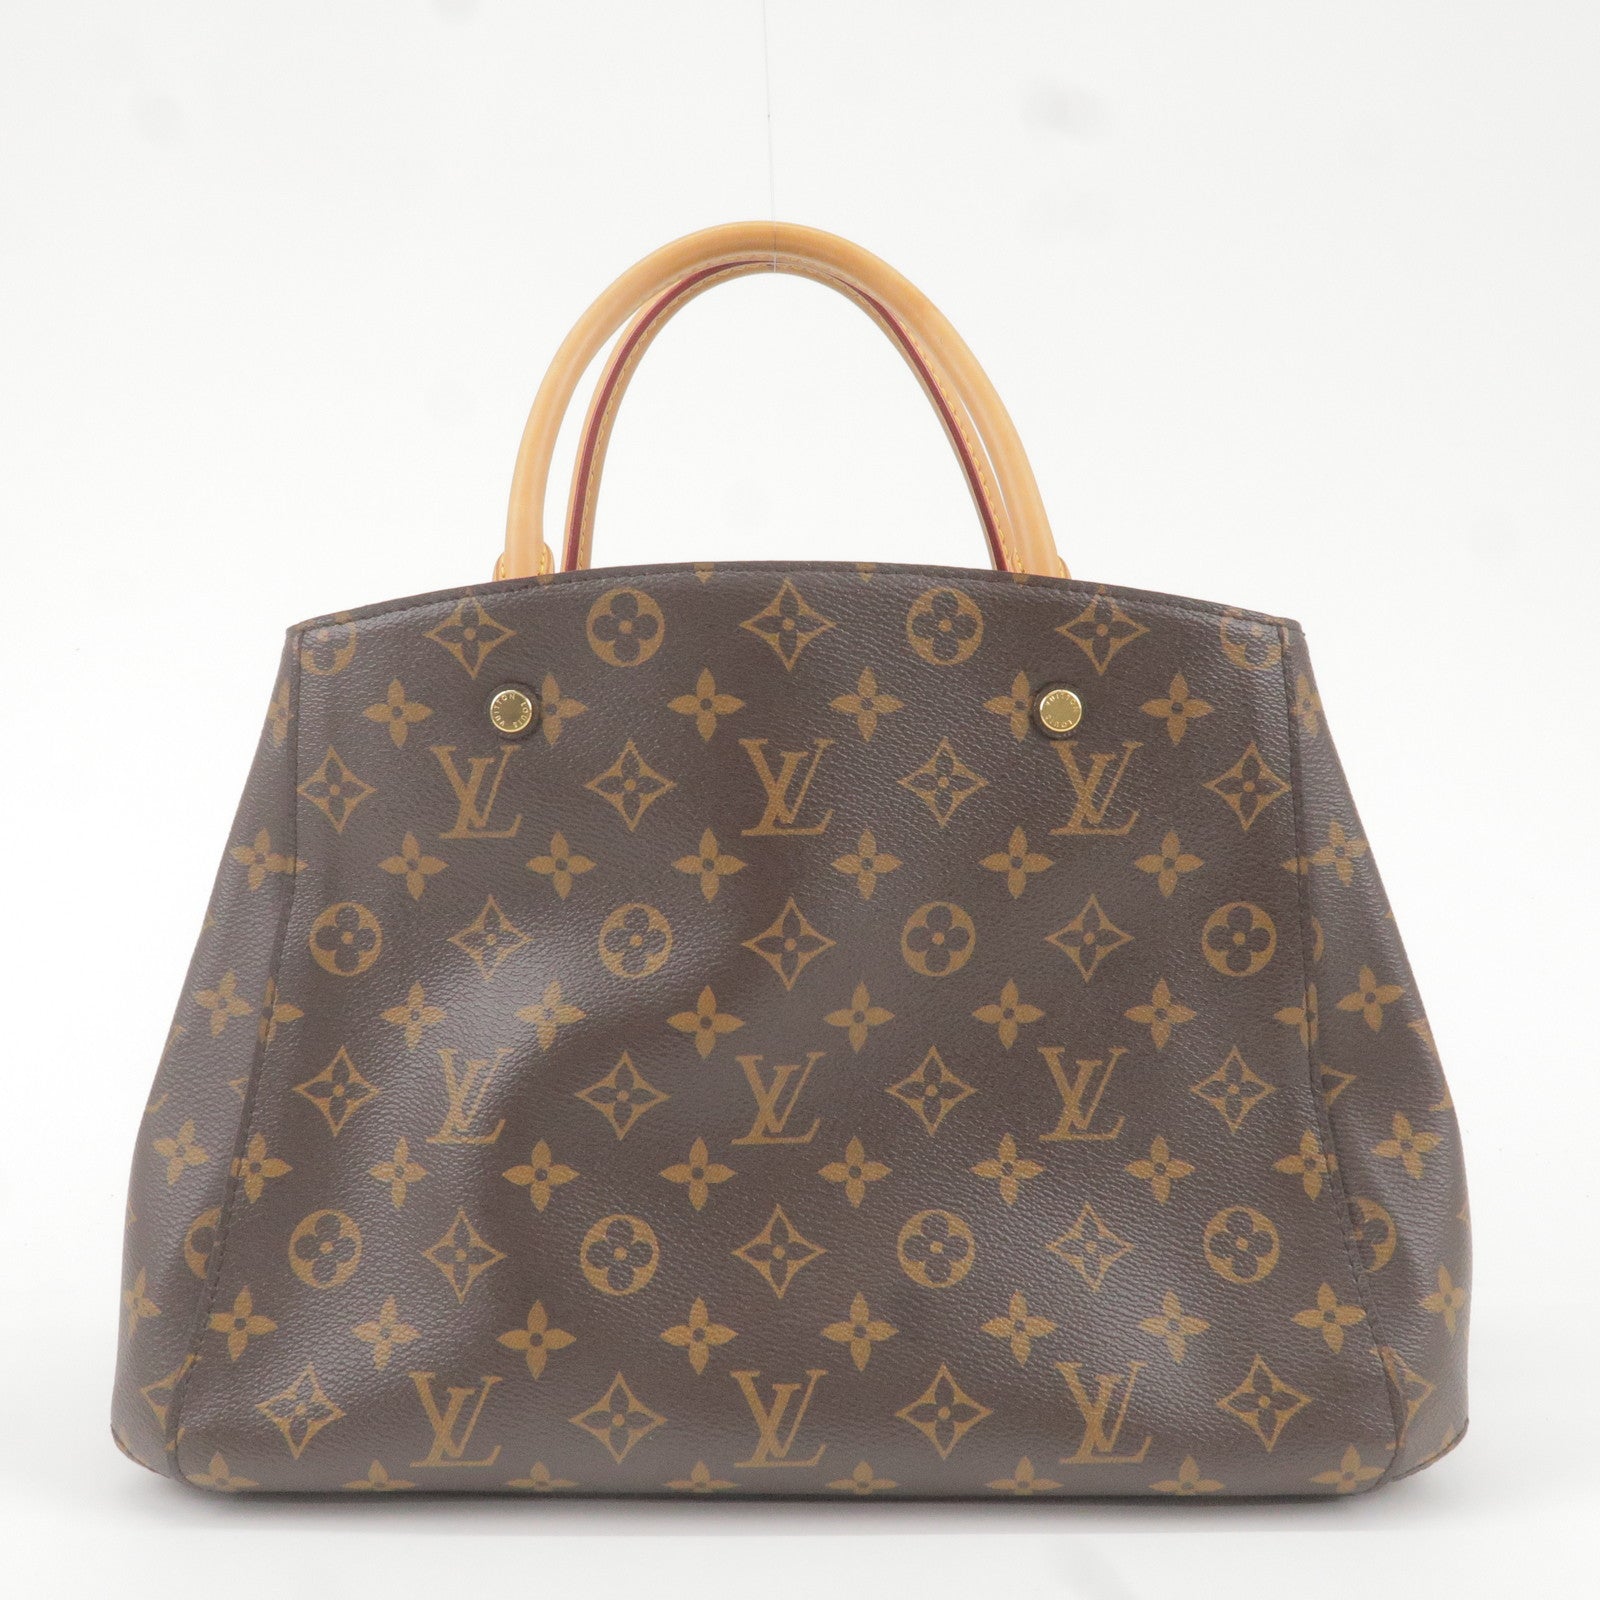 Louis Vuitton Pre-Owned Cherry Monogram Empreinte Montaigne MM Leather Tote, Best Price and Reviews